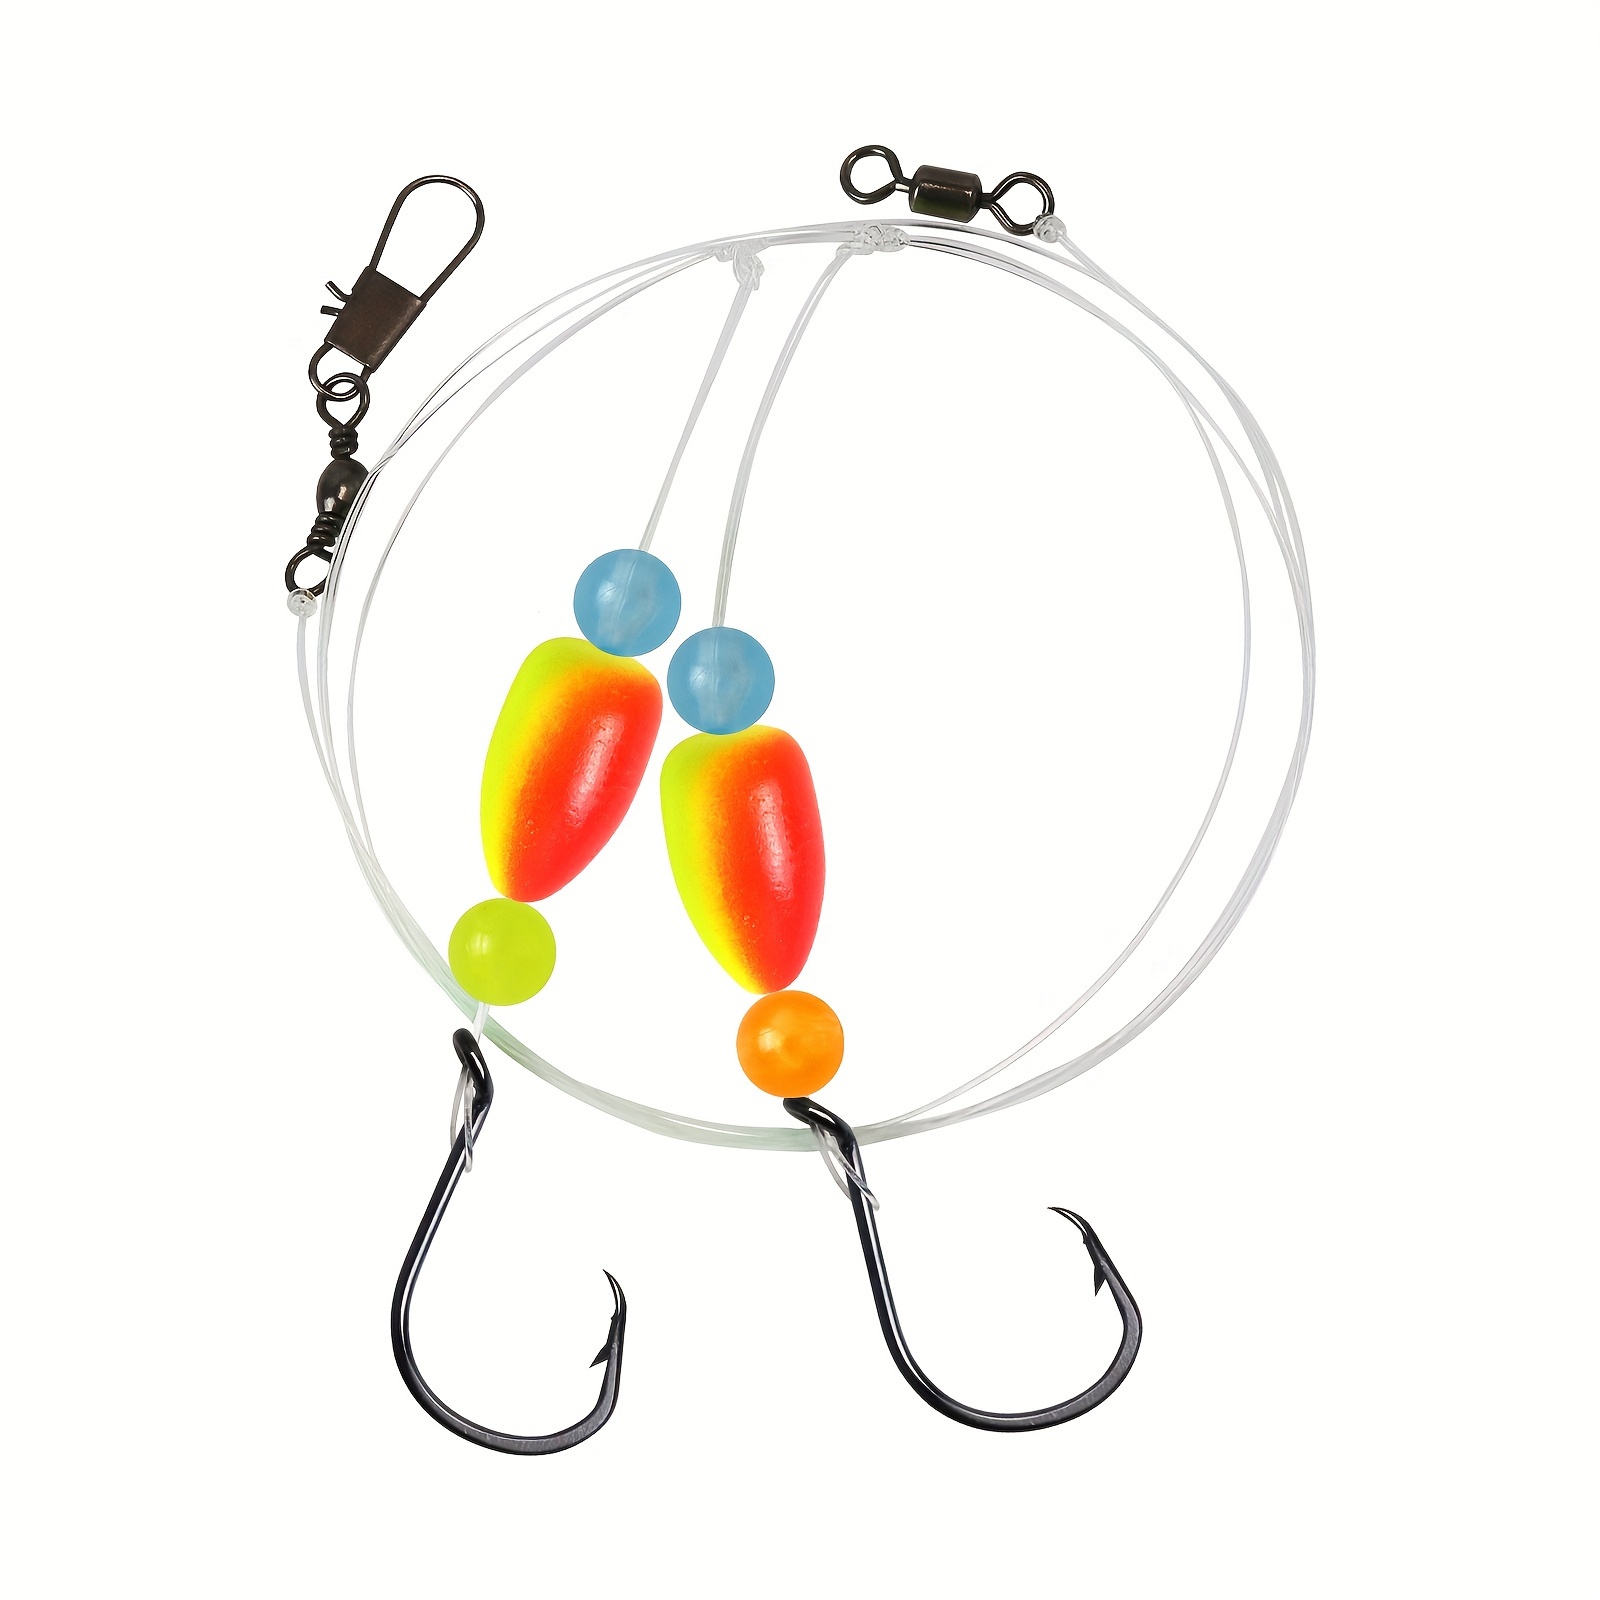 6 Pack Pompano Rigs Surf Fishing Rigs Saltwater Triple Drop Pompano Rigs  with Snell Floats Circle Hooks Beads Pre-Rigged Saltwater Fishing Rigs  Tackle